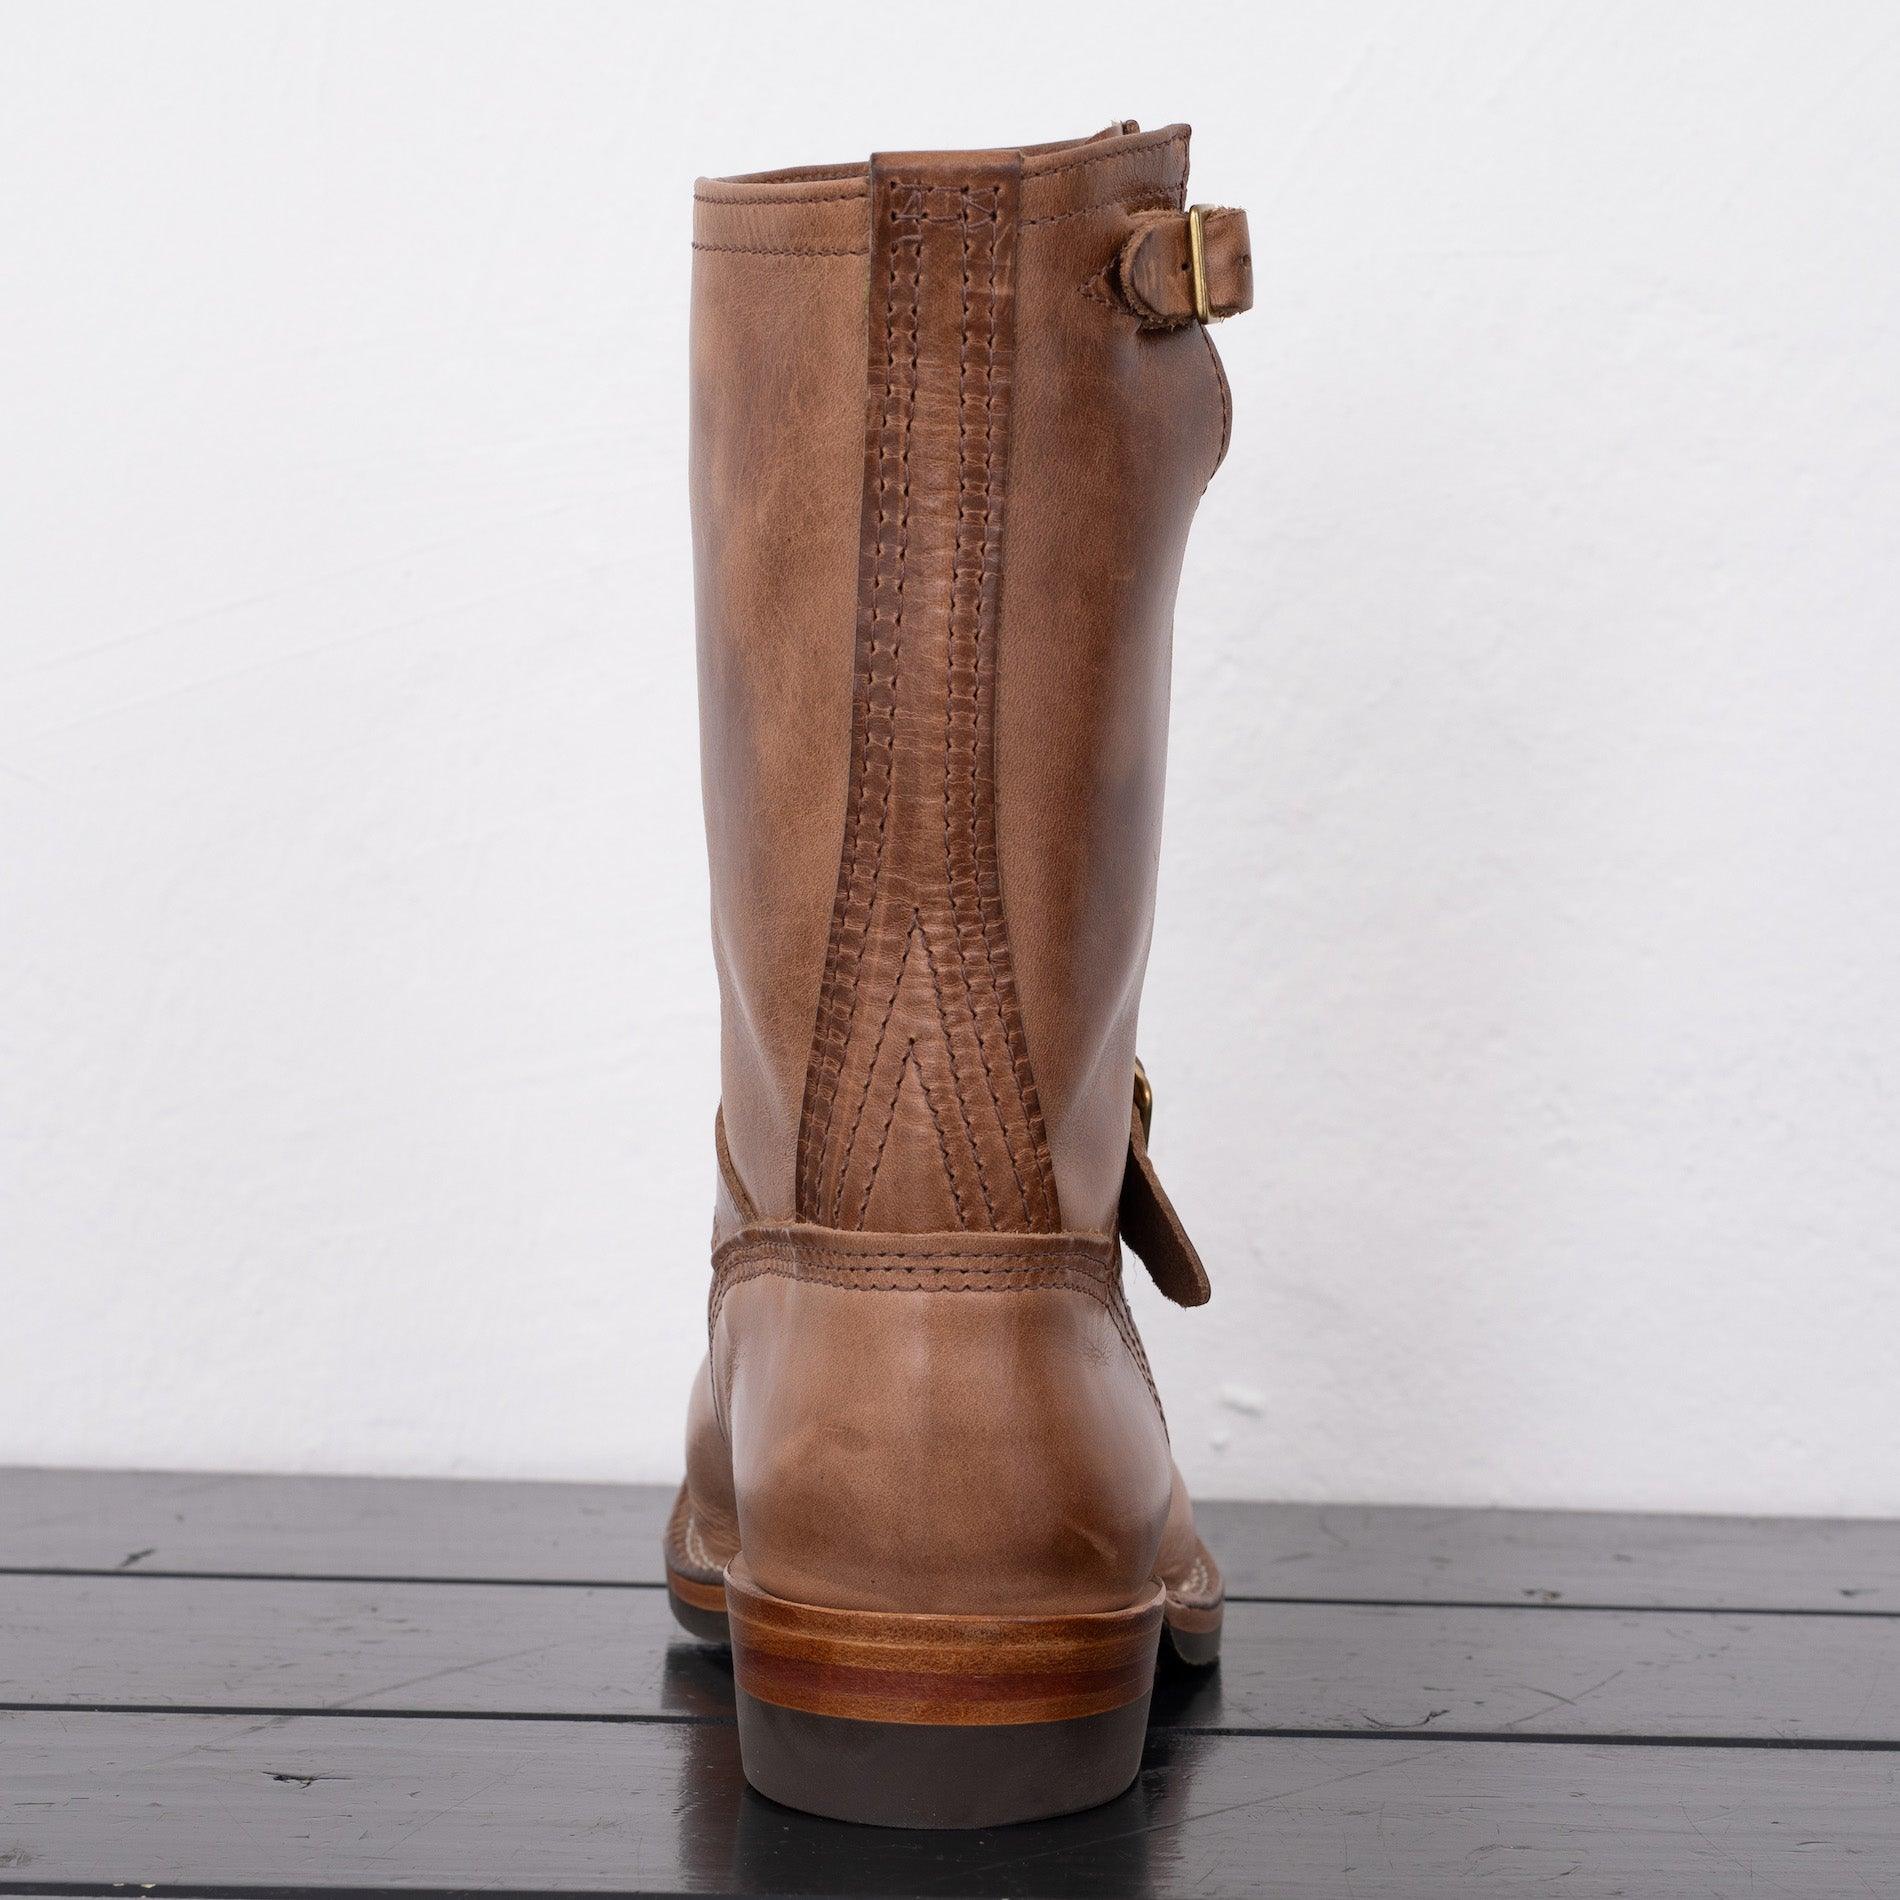 Image showing the WE-7600NATCXL-NAT - WESCO "Mister Lou" Engineer - Natural which is a Boots described by the following info Boots, Footwear, Released, Wesco and sold on the IRON HEART GERMANY online store